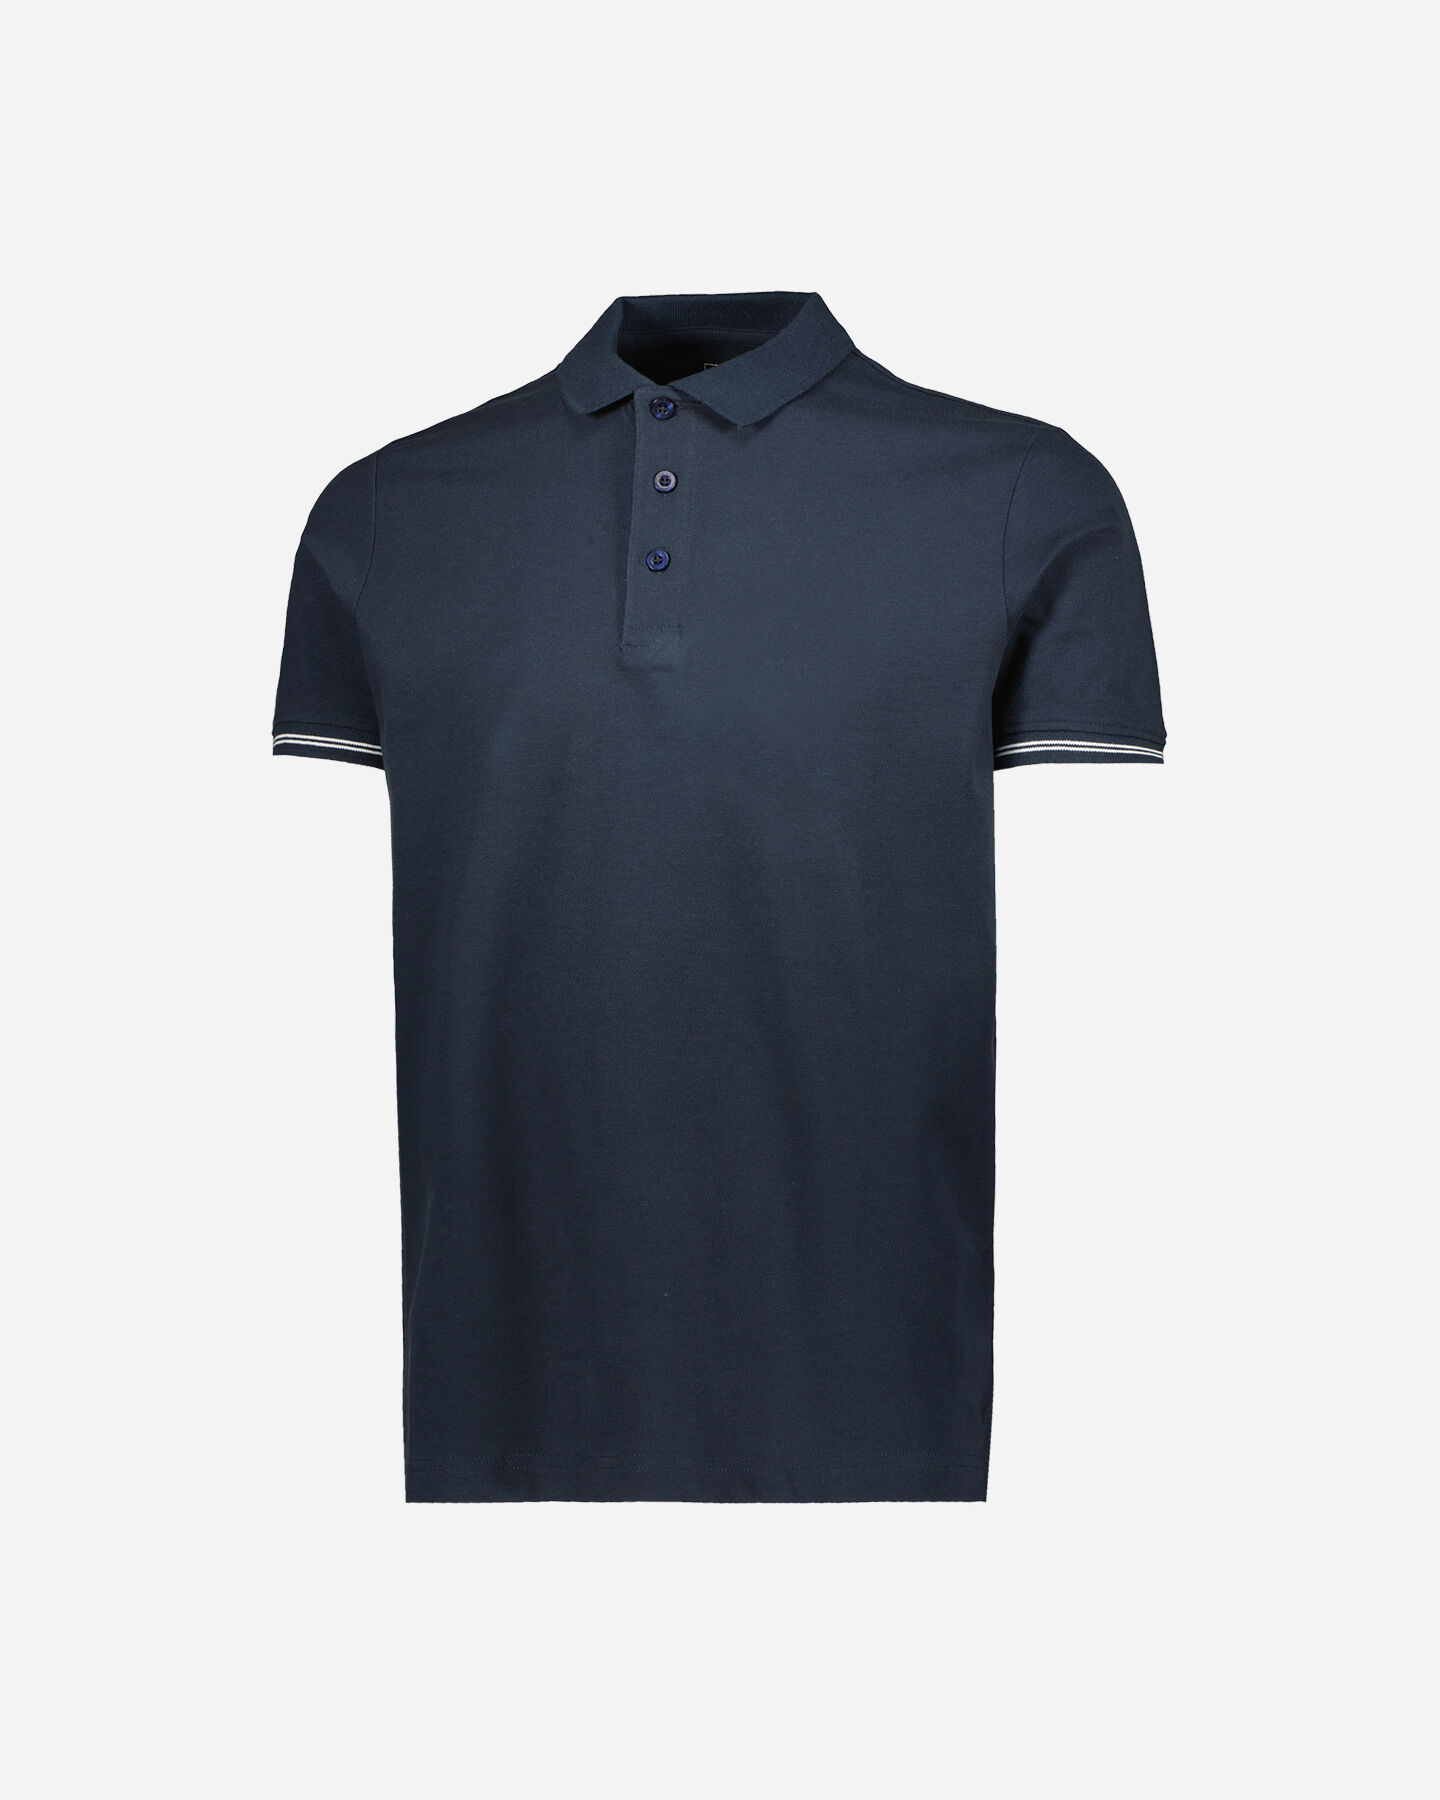  Polo DACK'S BASIC COLLECTION M S4118365|1125|S scatto 5